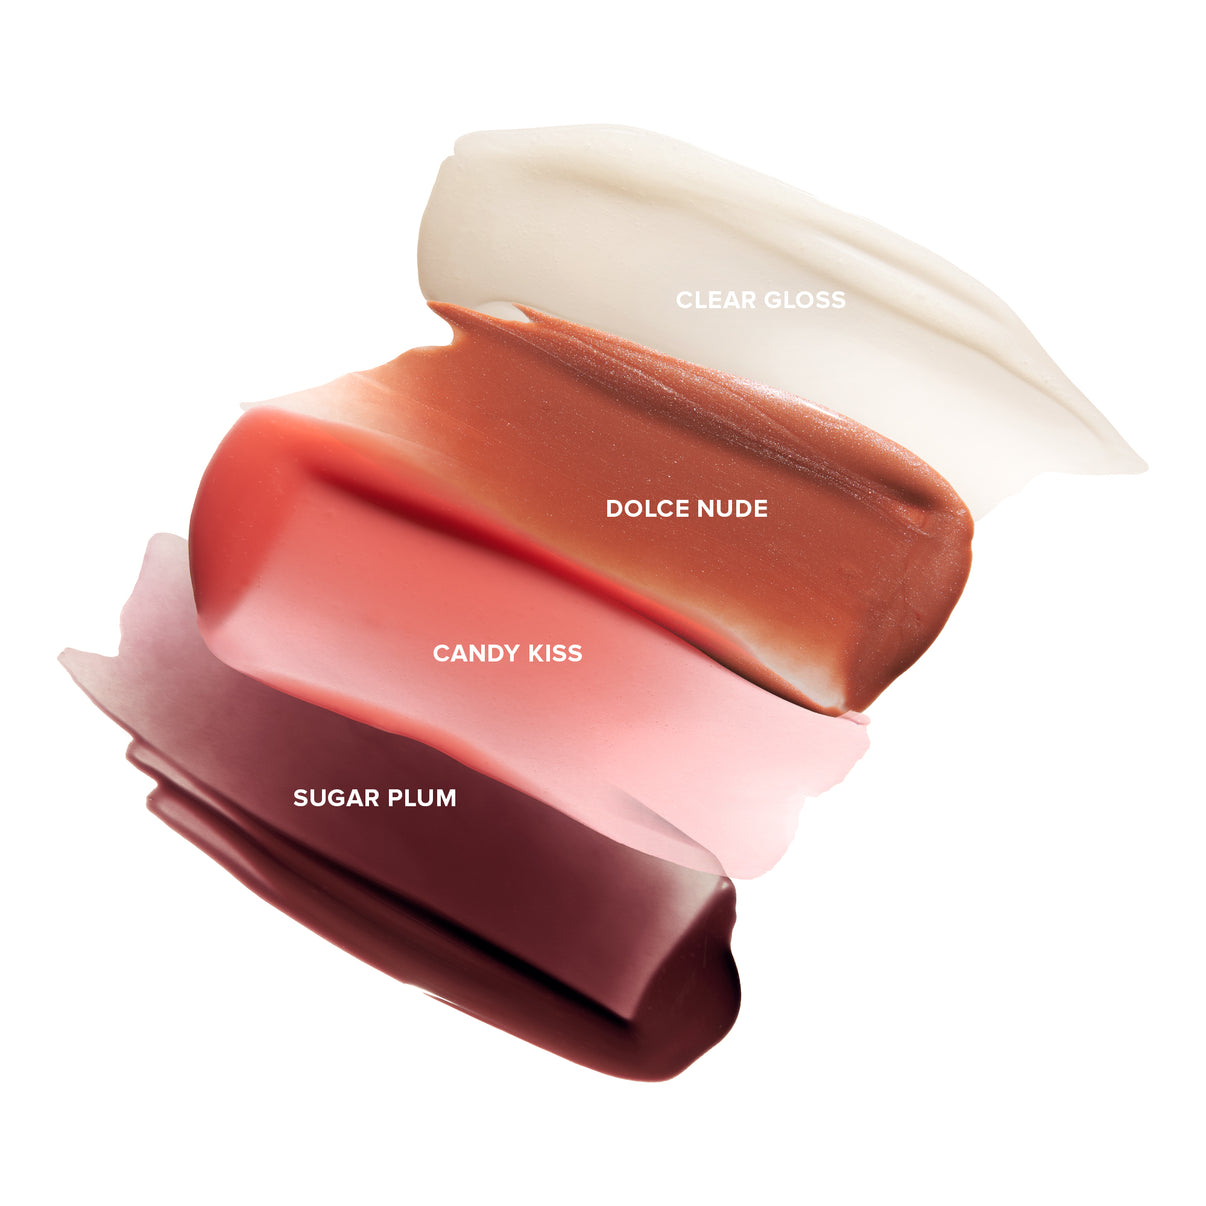 sugar plum and other shades Hydrating Peptide Lip Butter swatches 